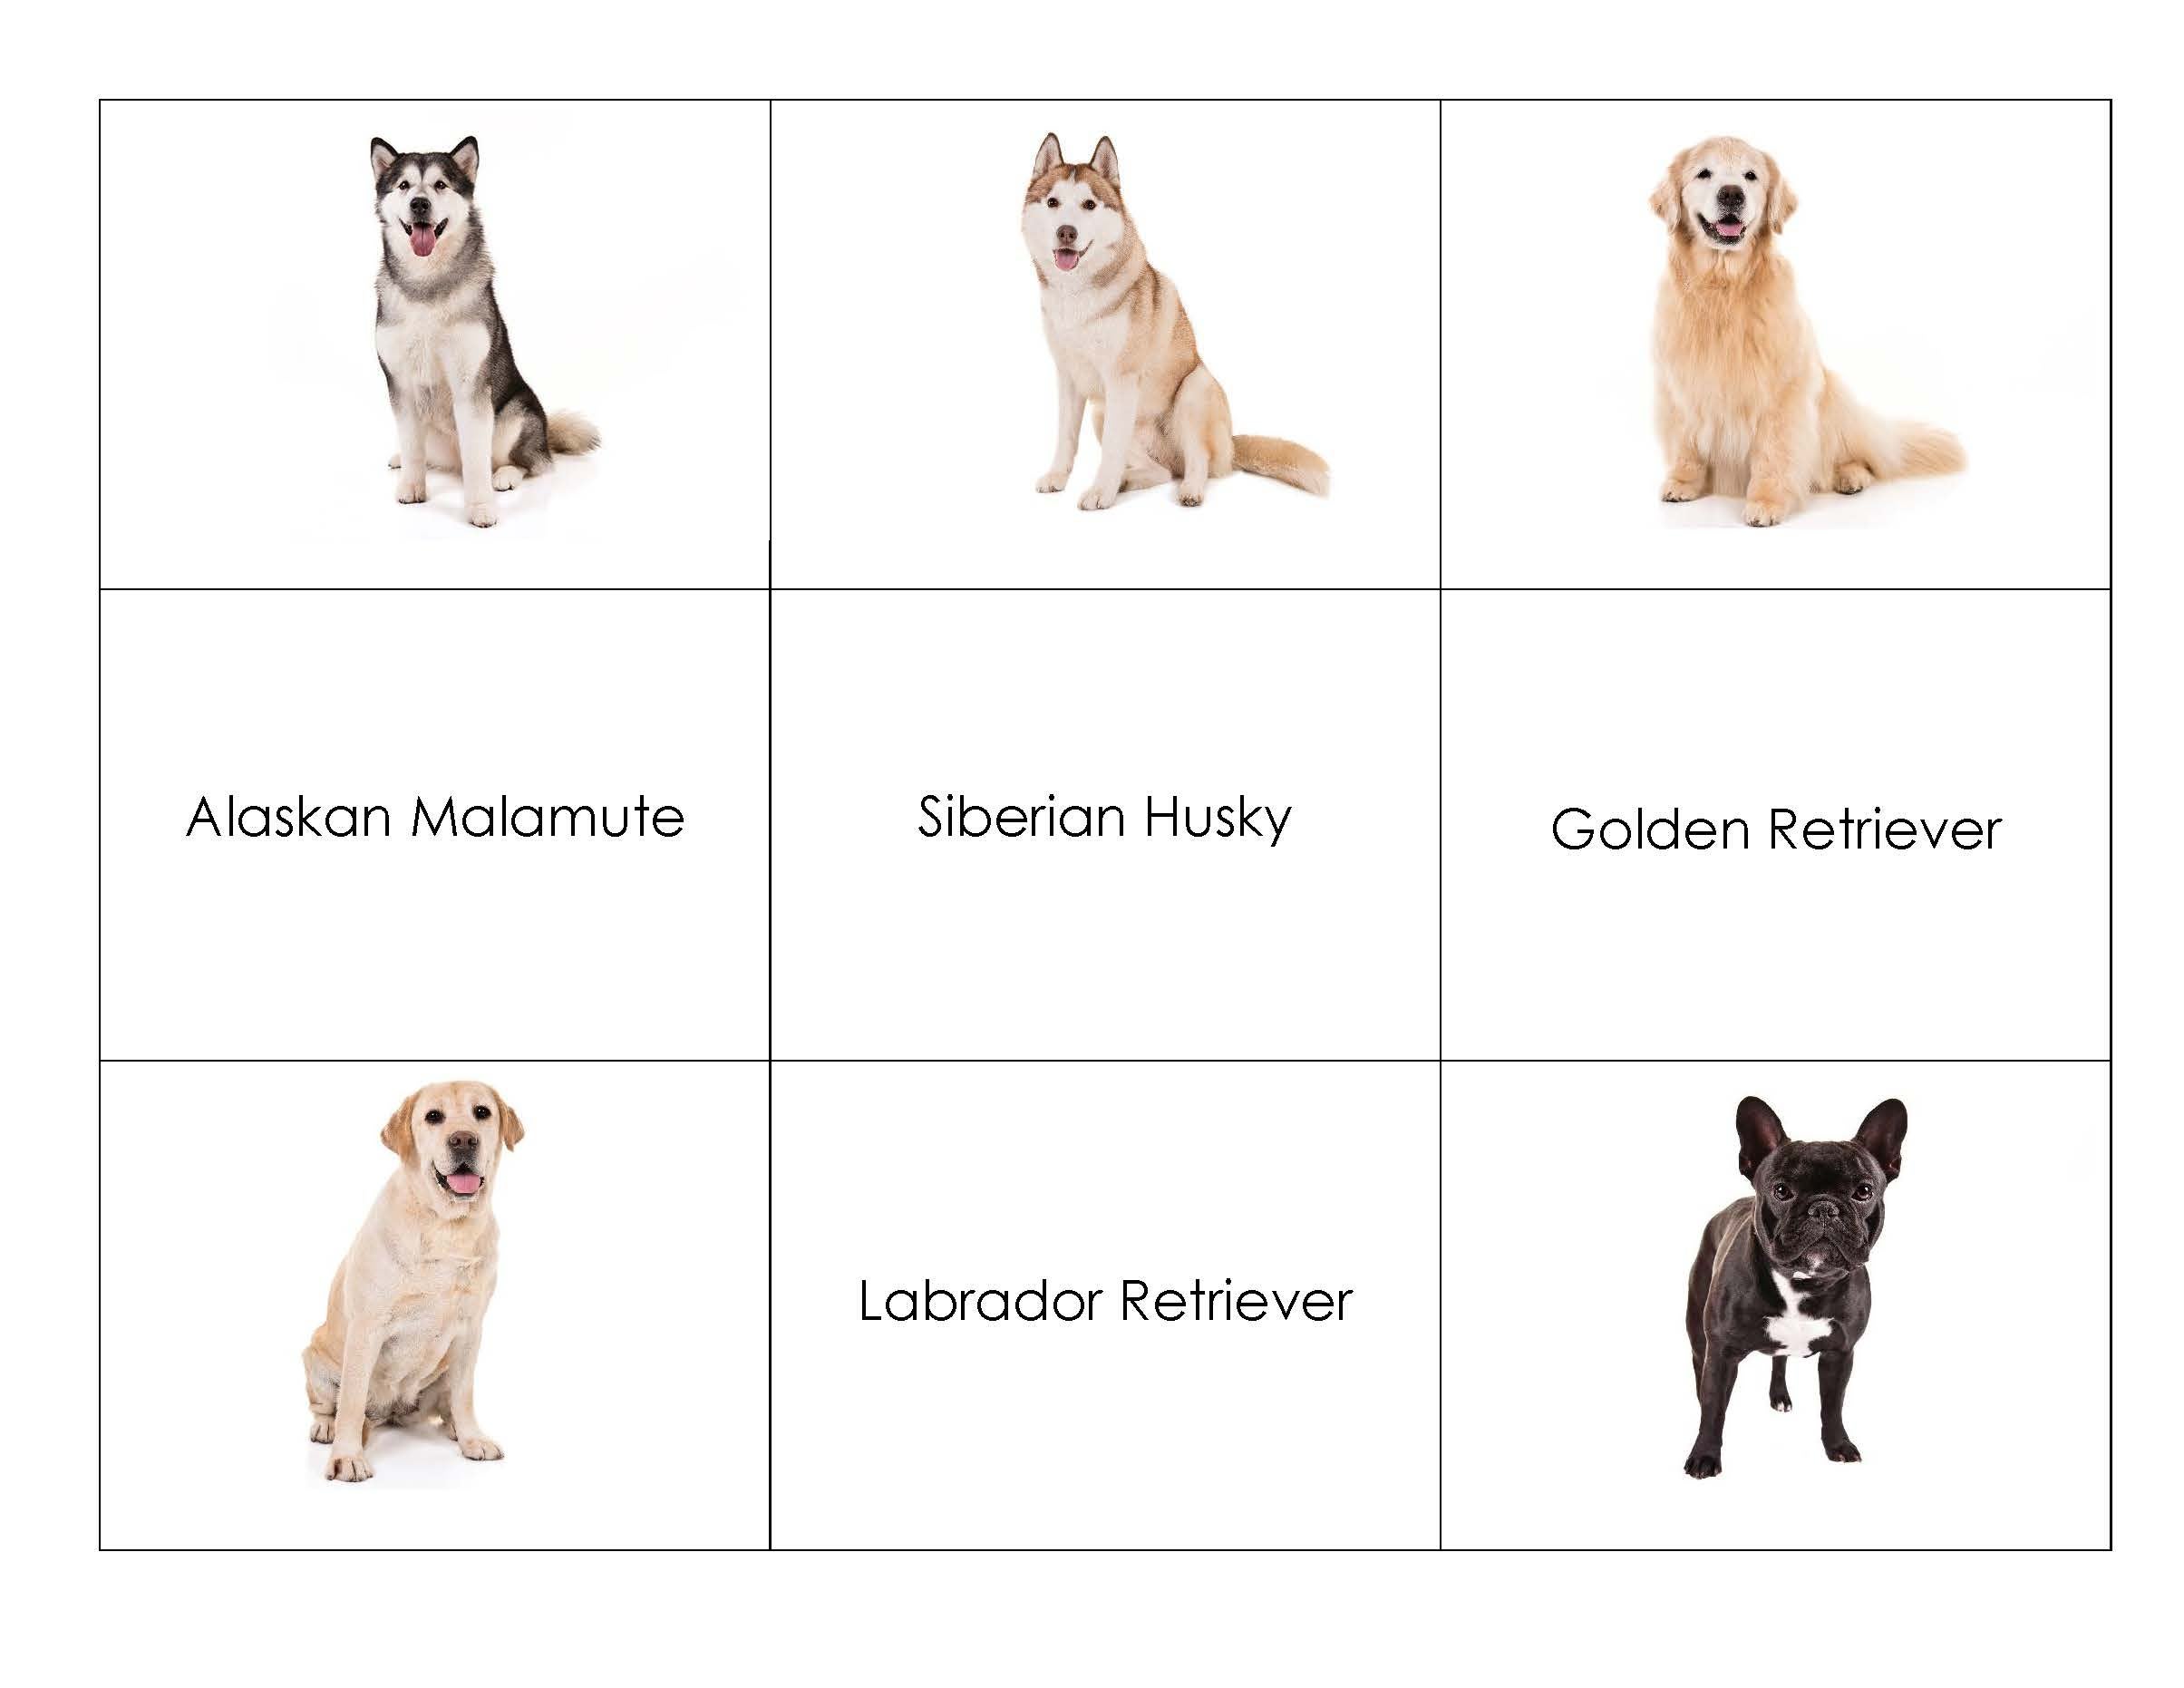 Dog Breed Matching Game – American Kennel Club